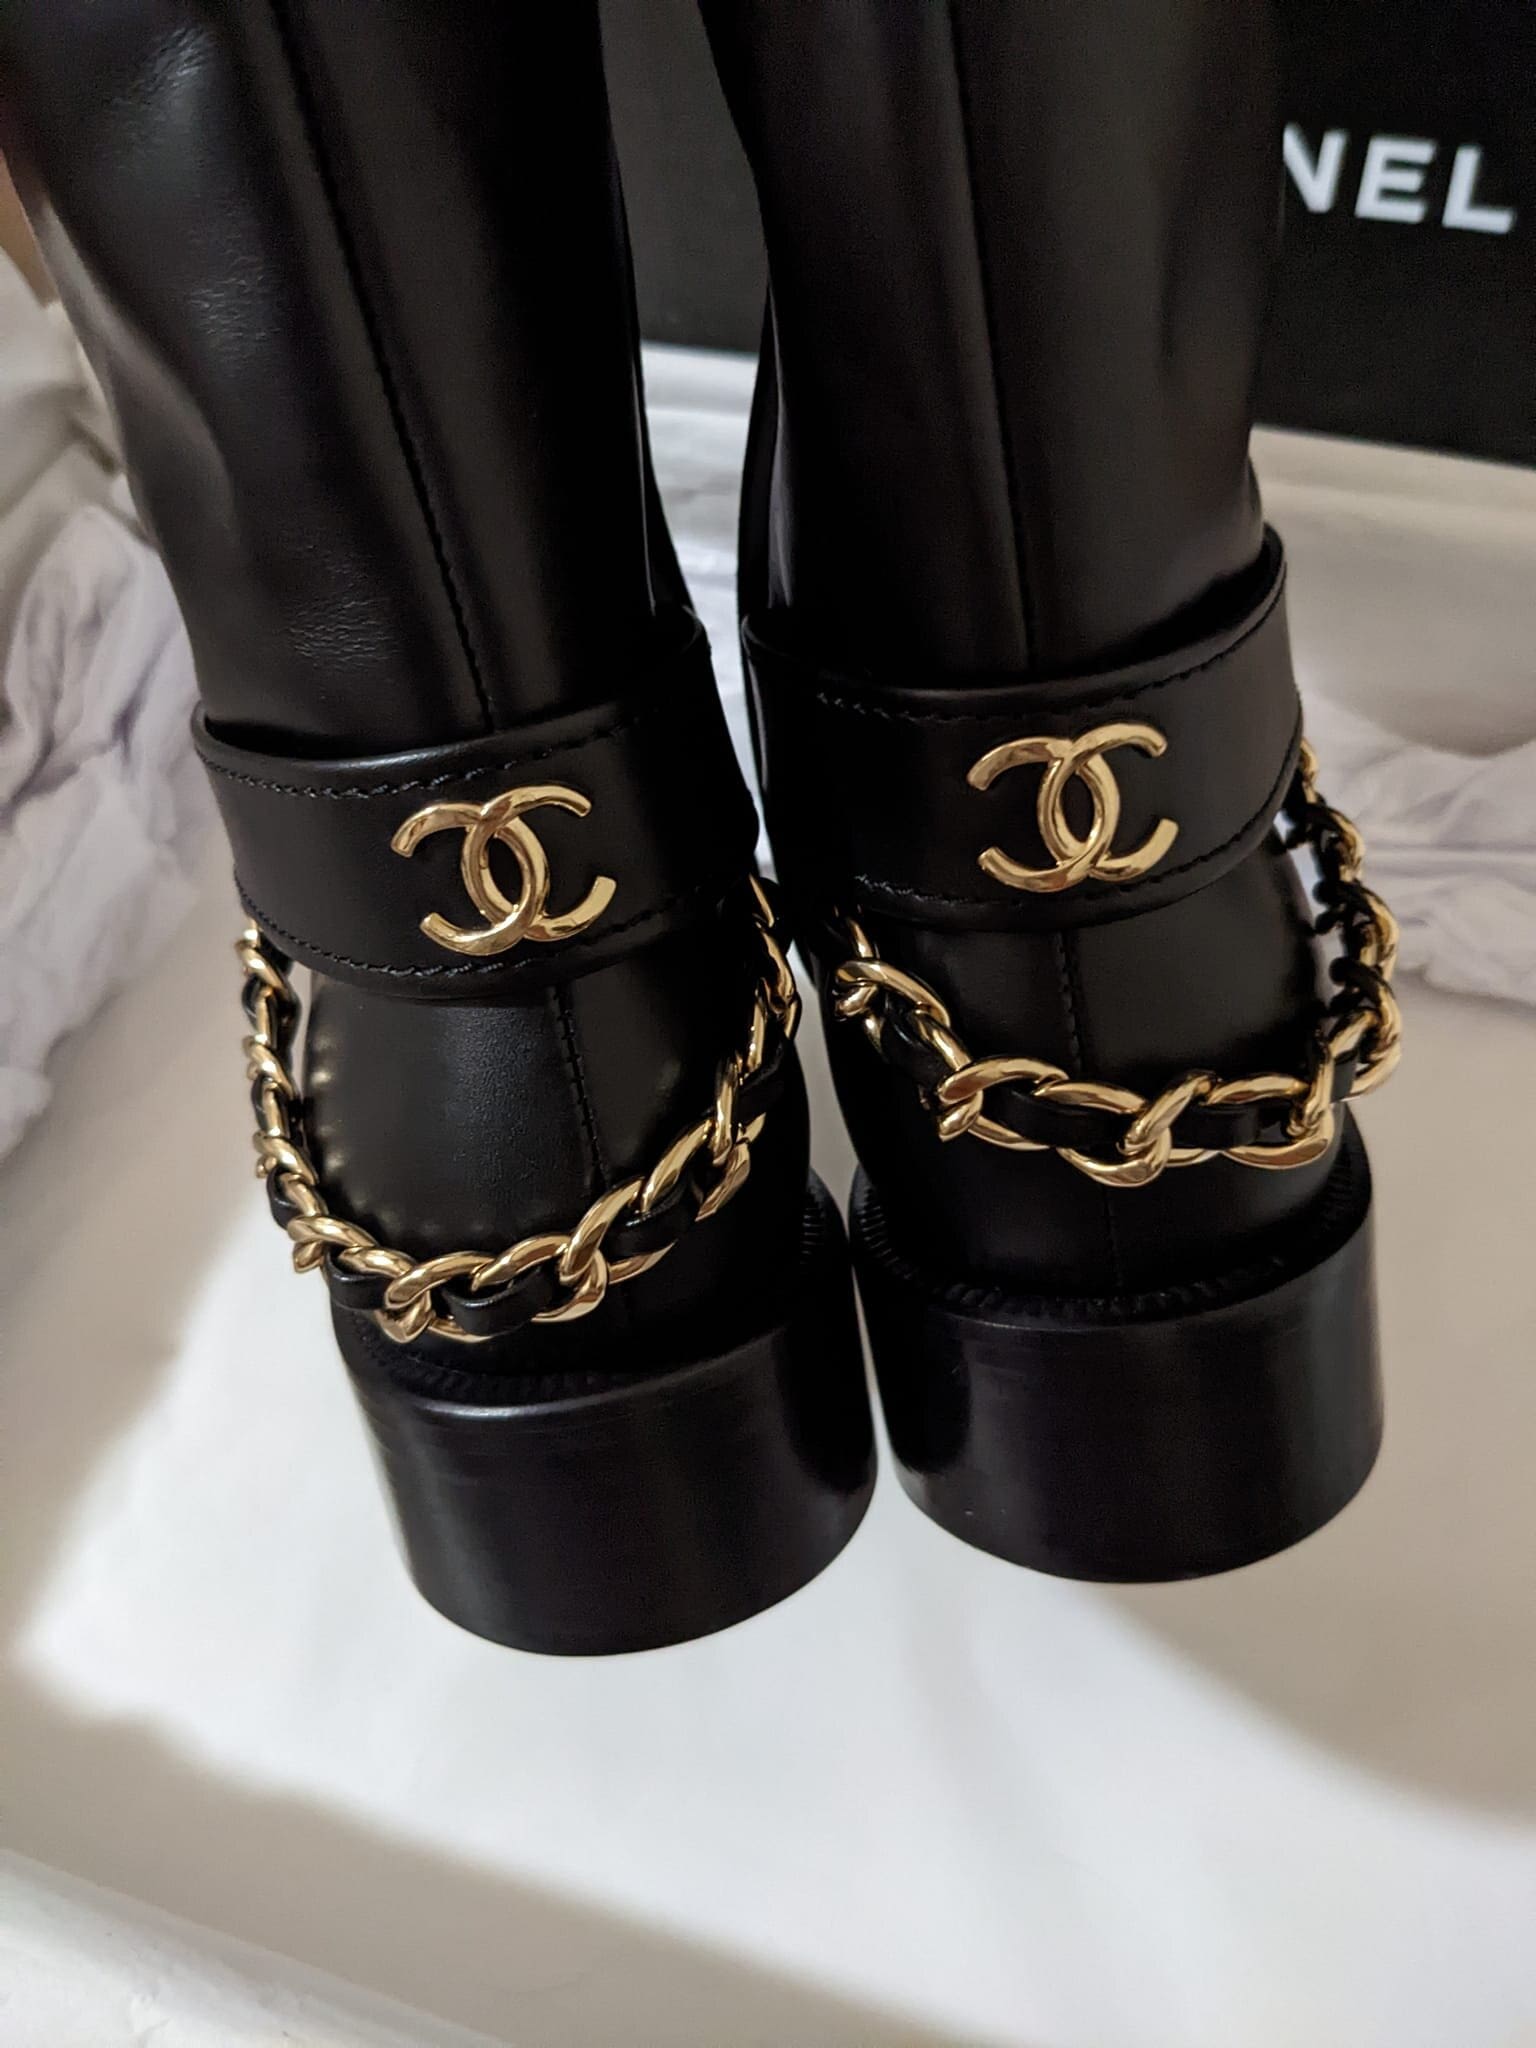 Chanel 16B Black Cap Toe Ankle Boots with White Chain CC Heel  375  I  MISS YOU VINTAGE